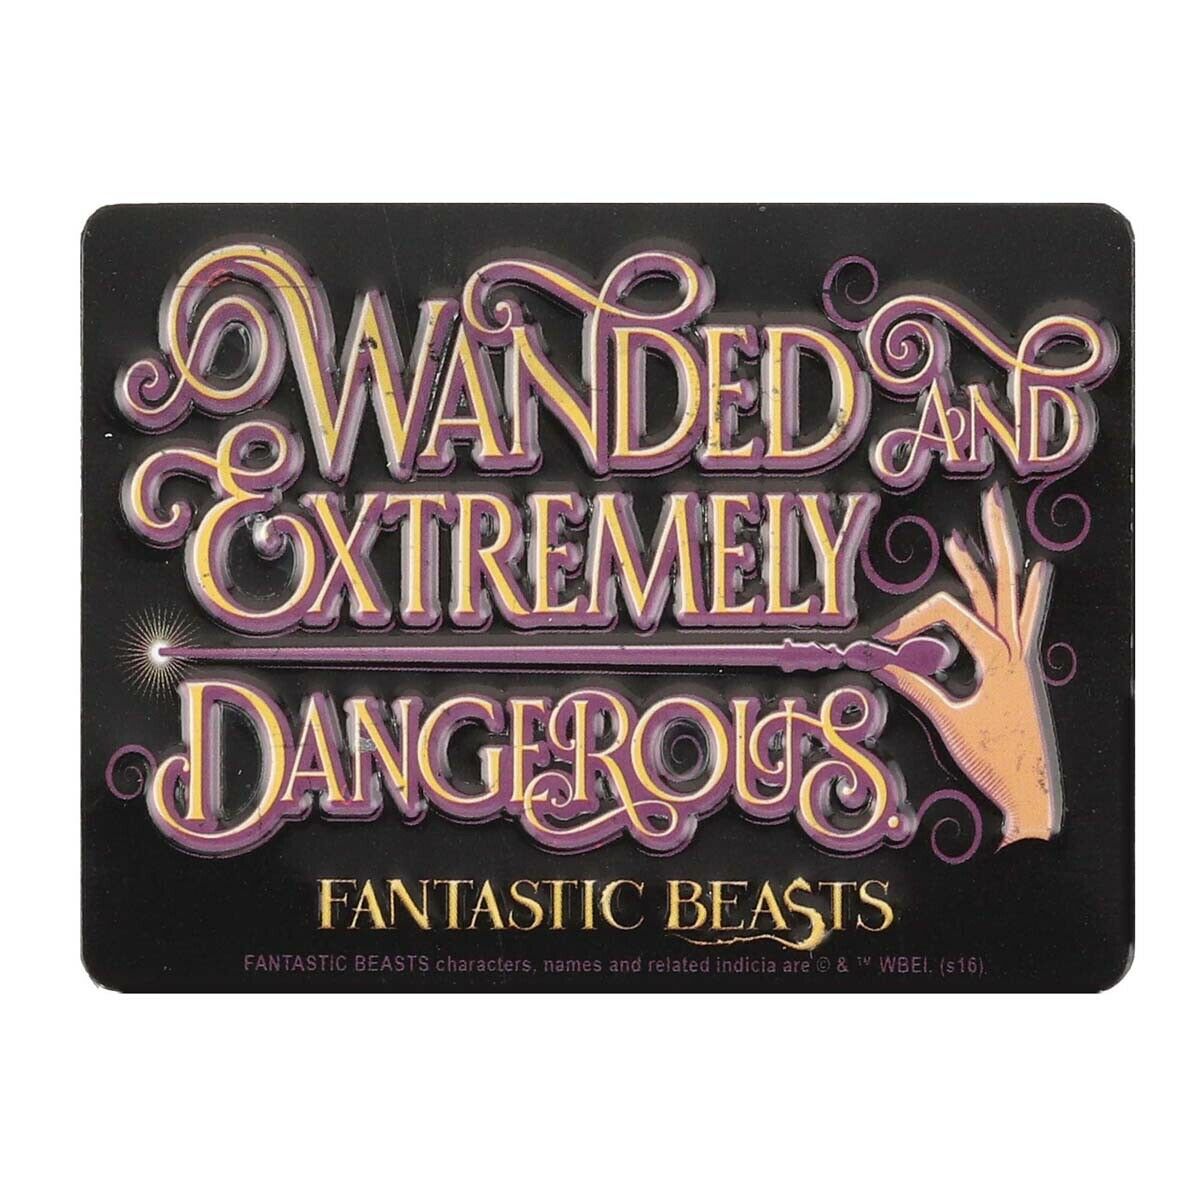 Fantastic Beasts Wanded 100112 Extremely Dangerous Embossed Metal Magnet